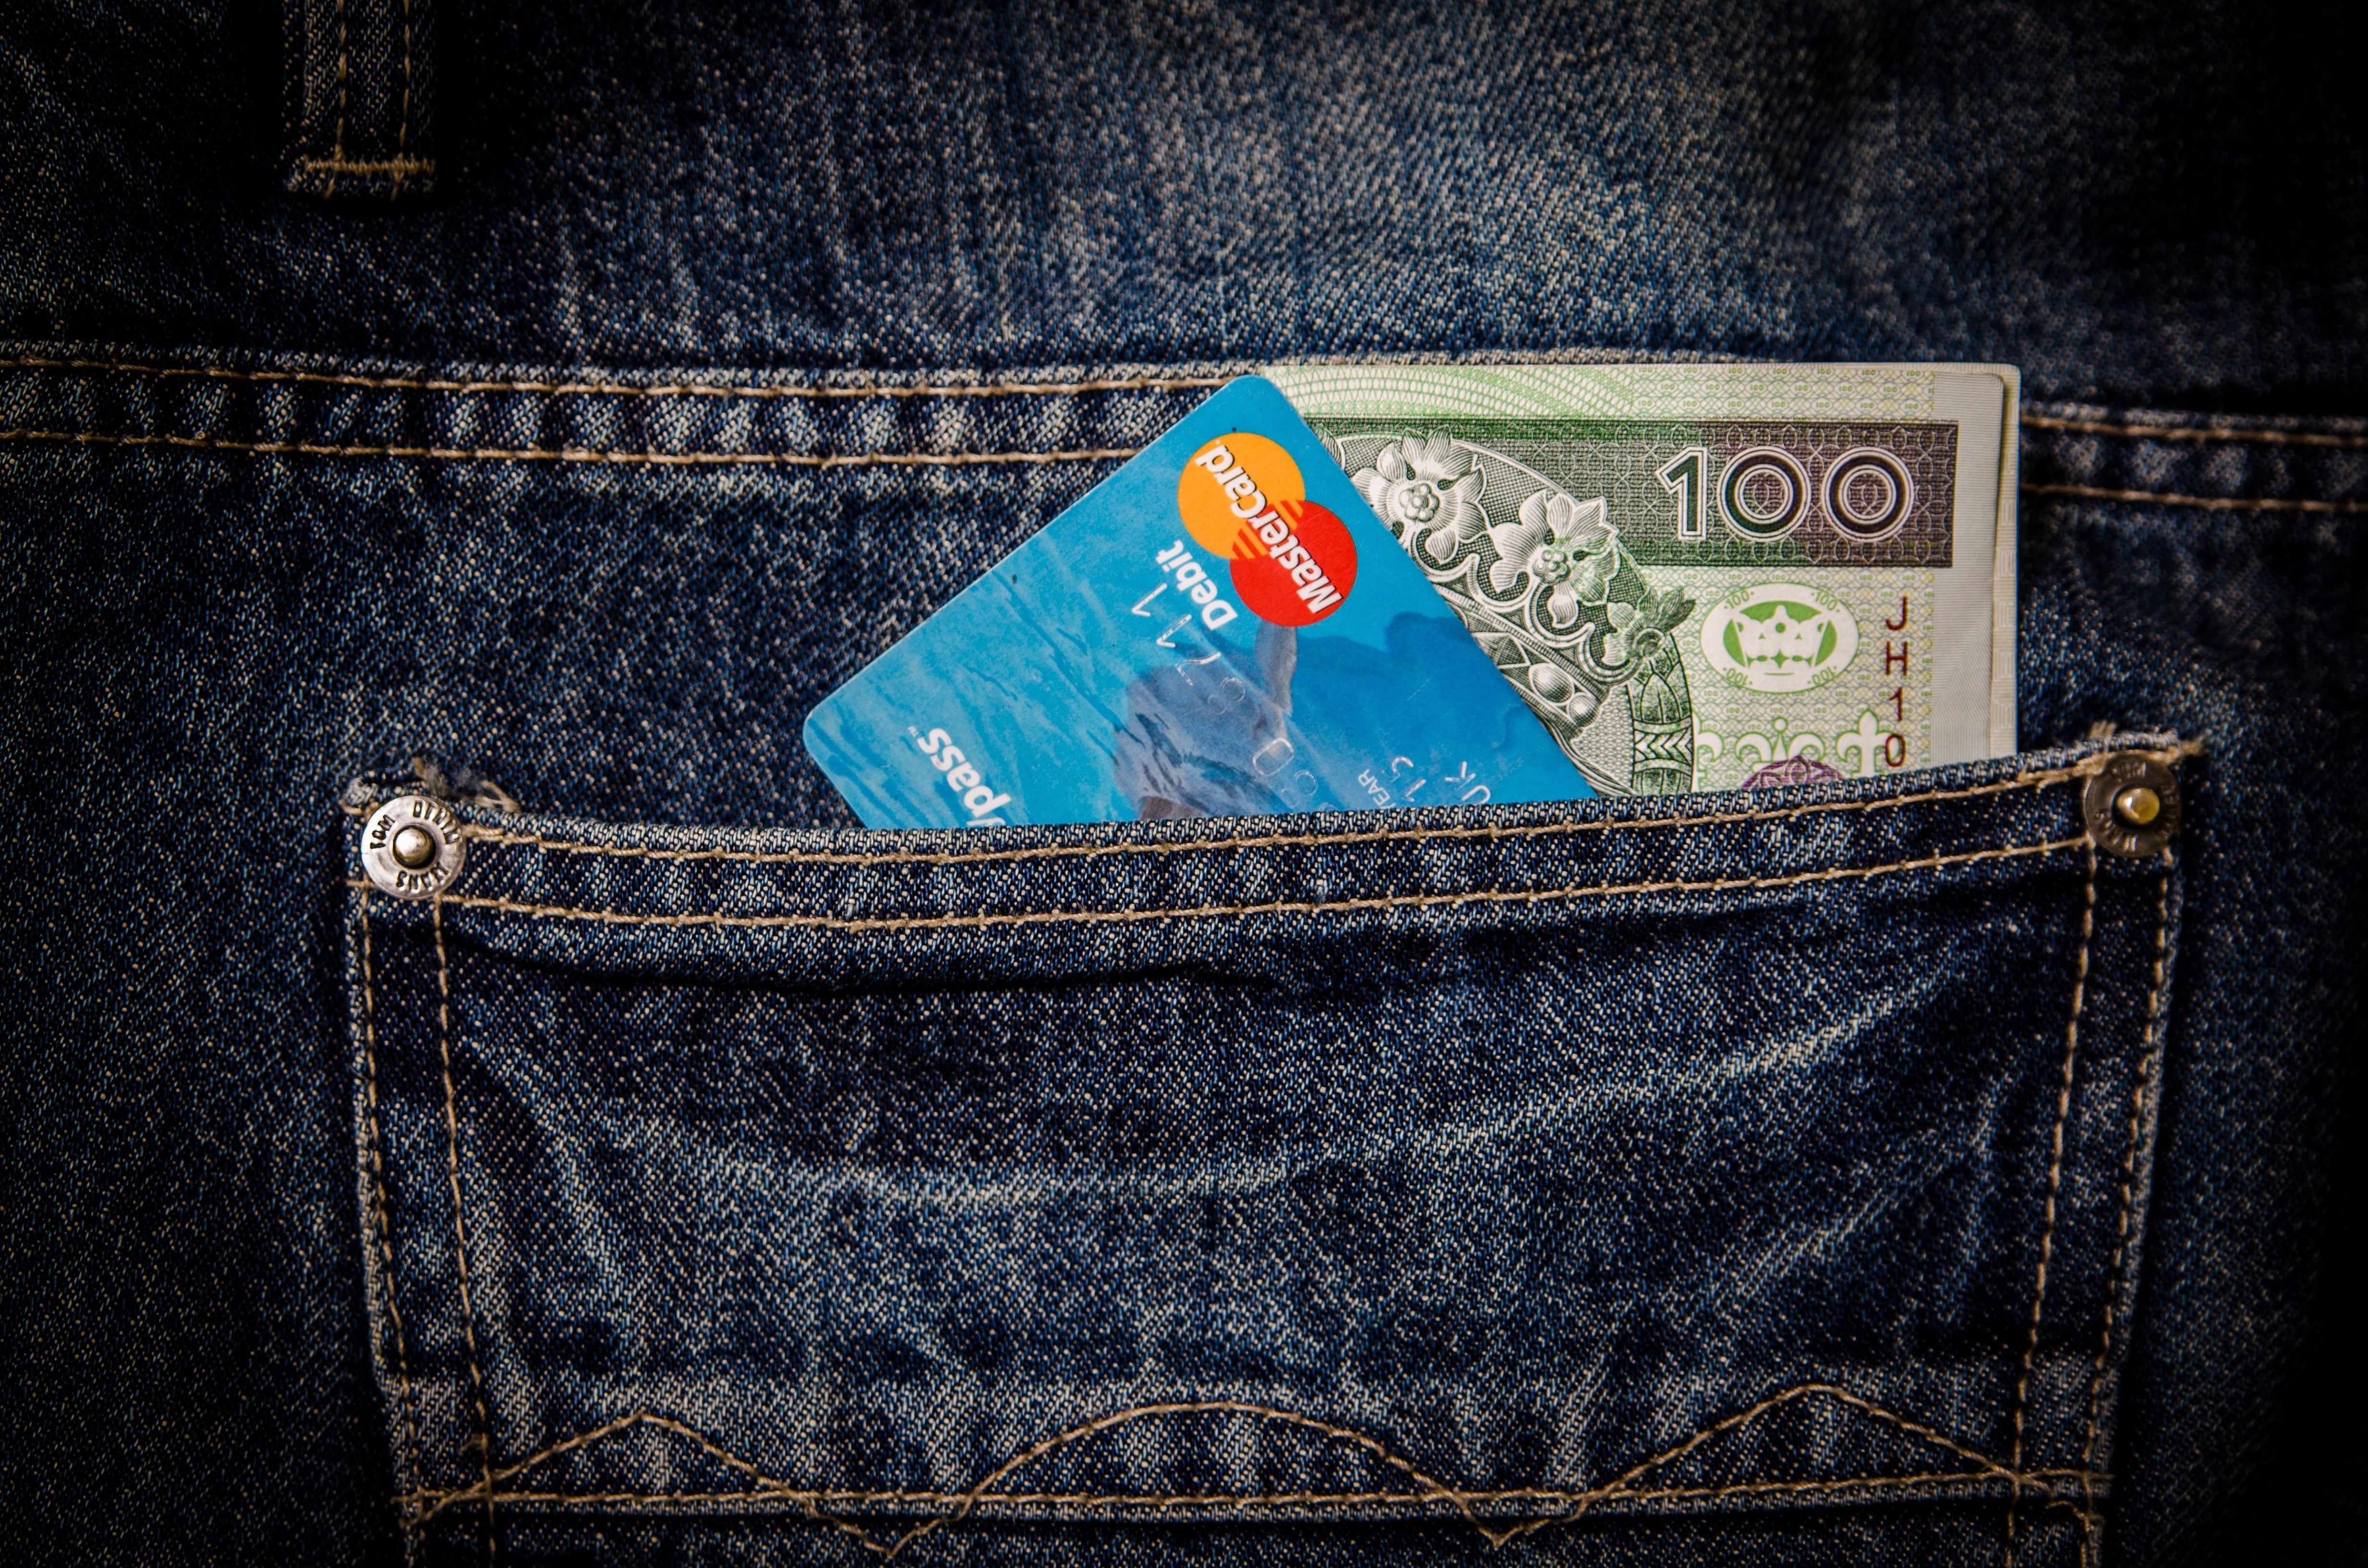 Travelling Abroad – Is Cash Better Or Credit Card?